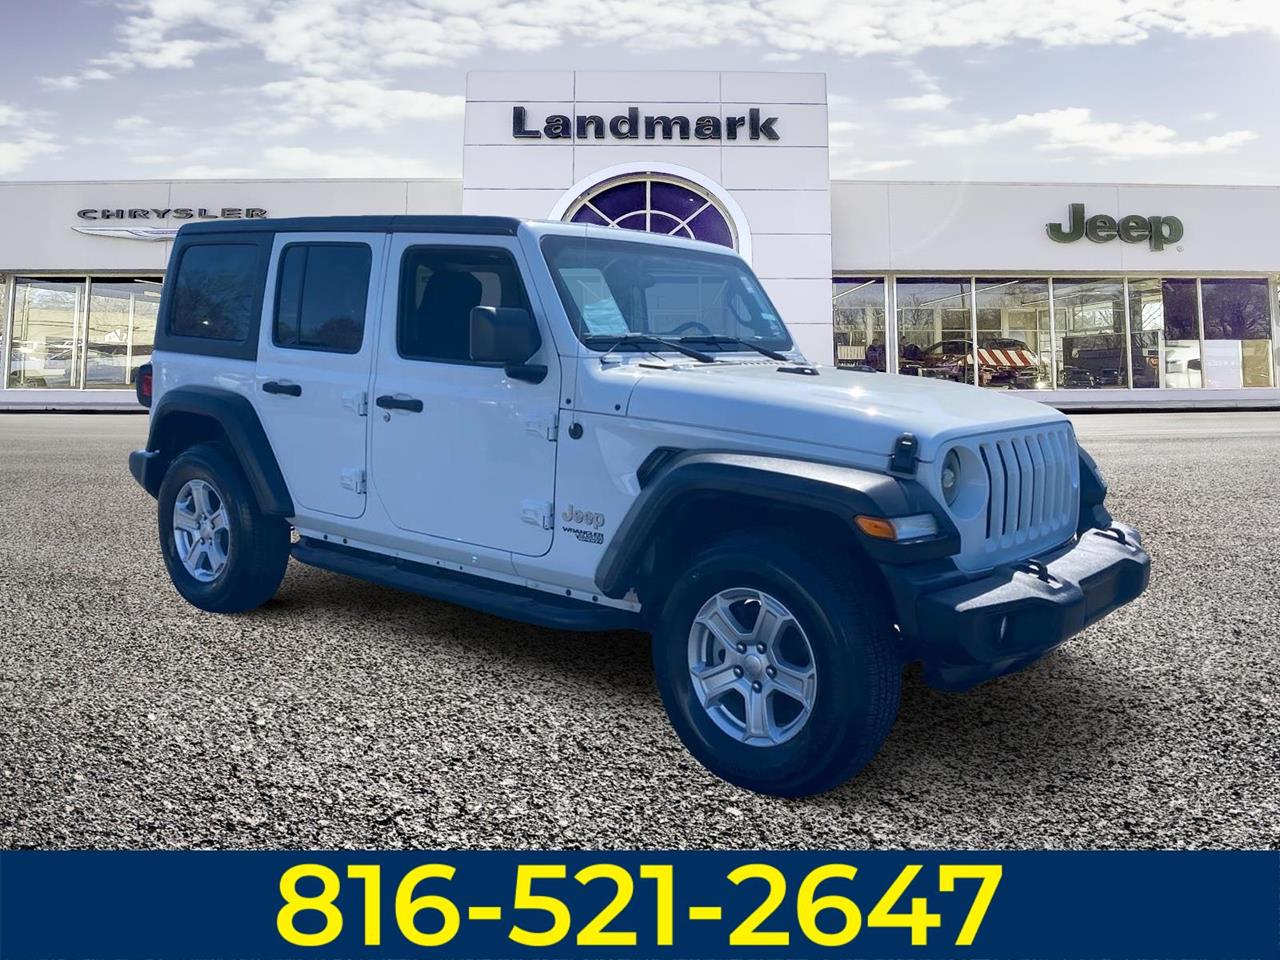 Used 2019 Jeep Wrangler Unlimited Sport S SUV